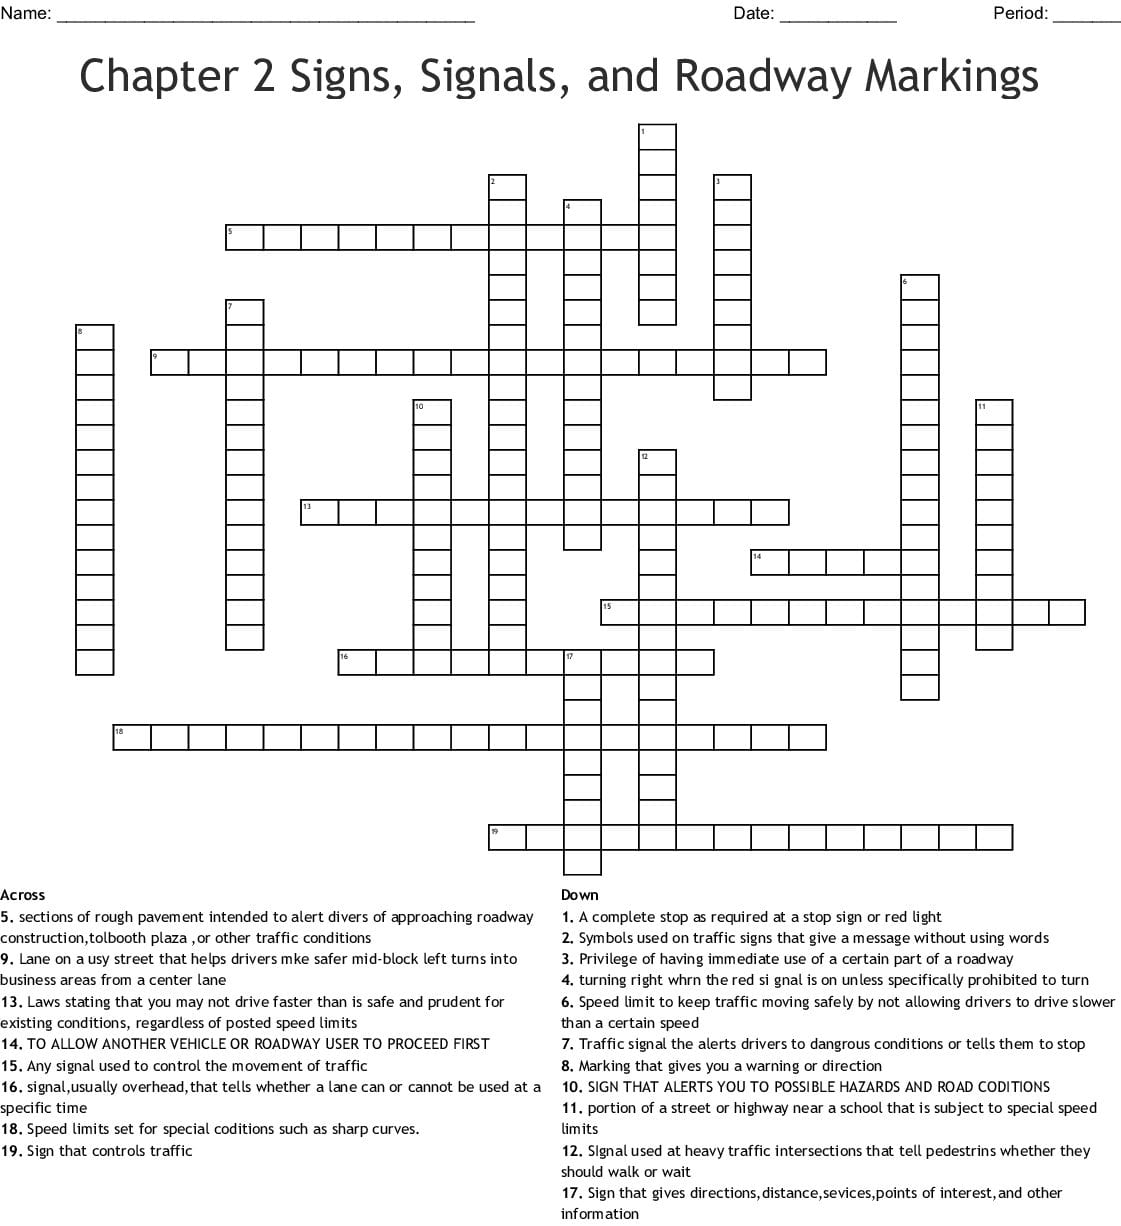 chapter-2-signs-signals-and-roadway-markings-worksheet-answers-db-excel